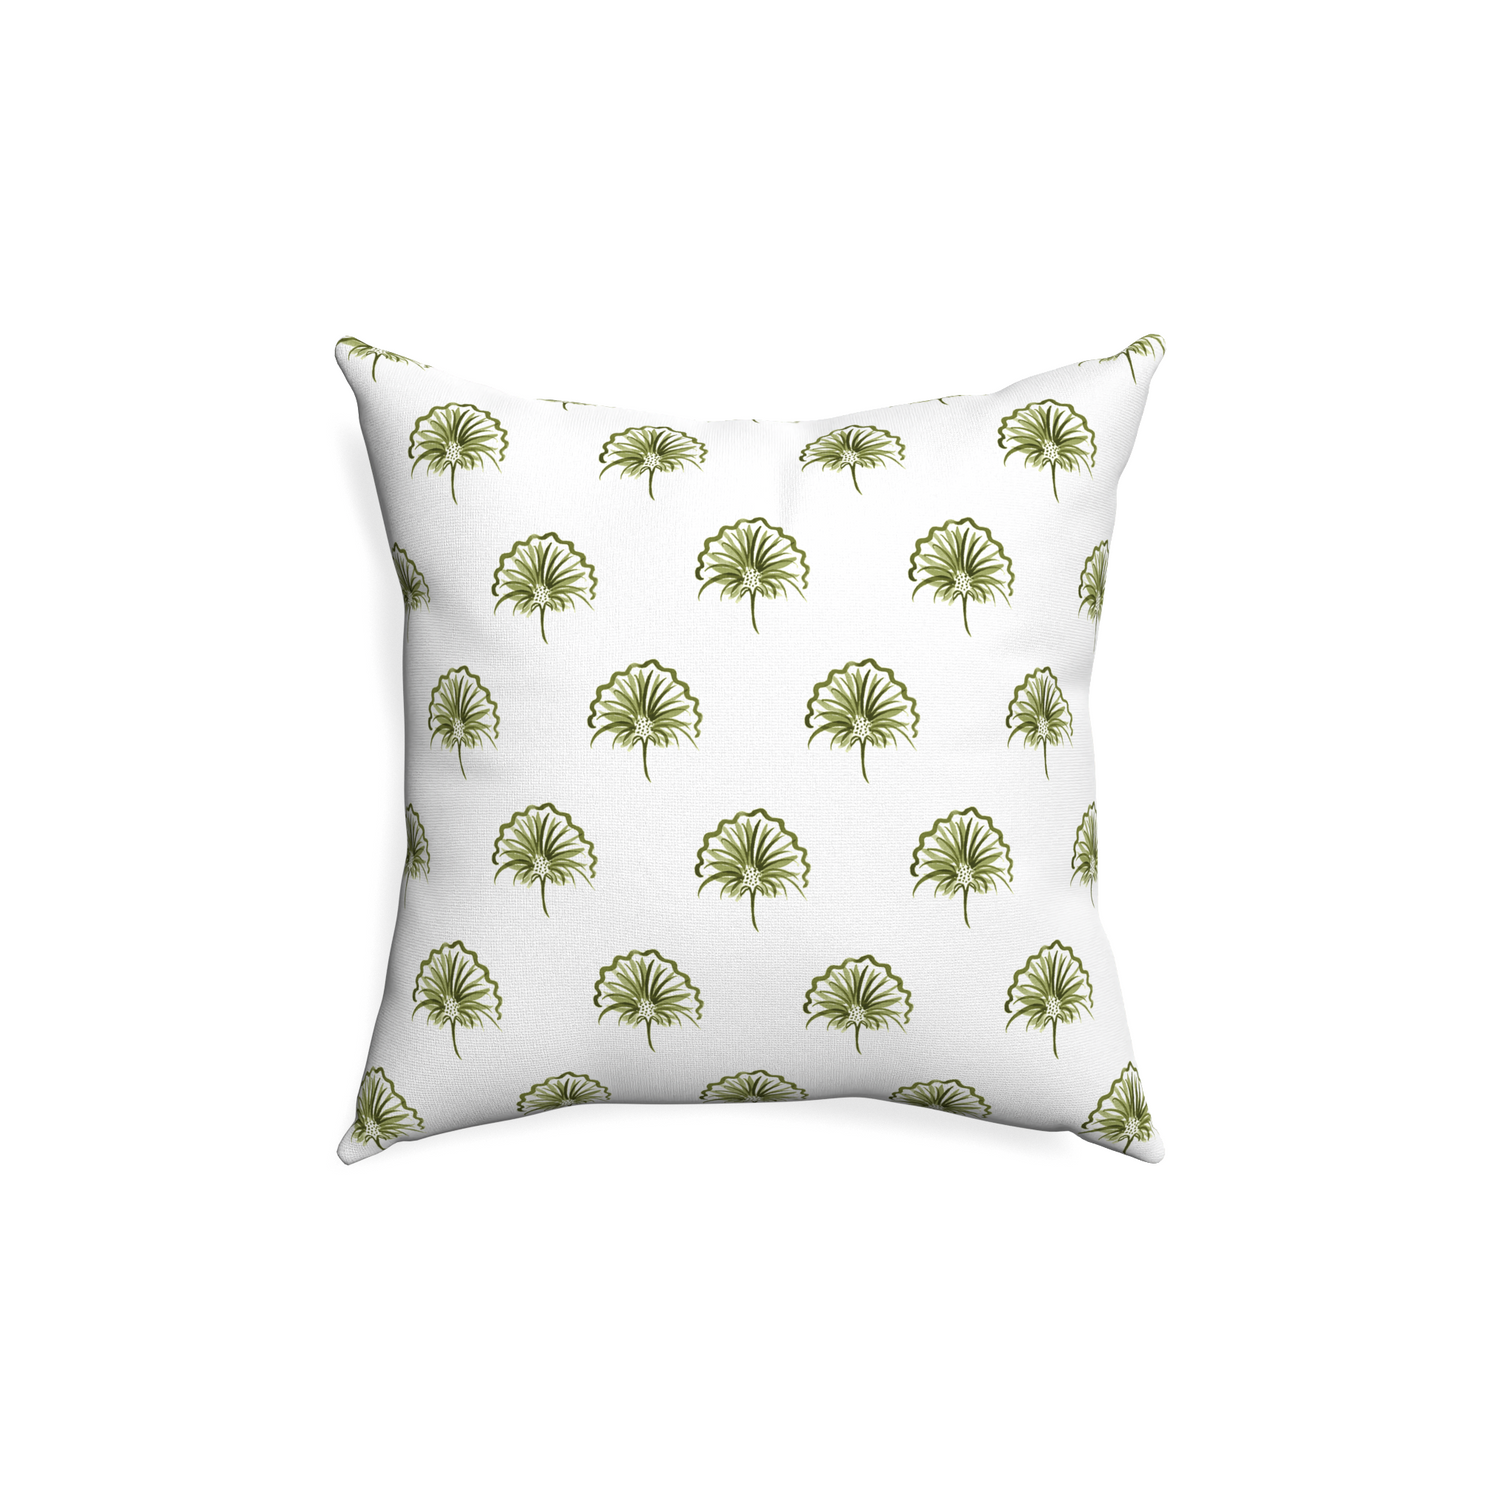 18-square penelope moss custom pillow with none on white background